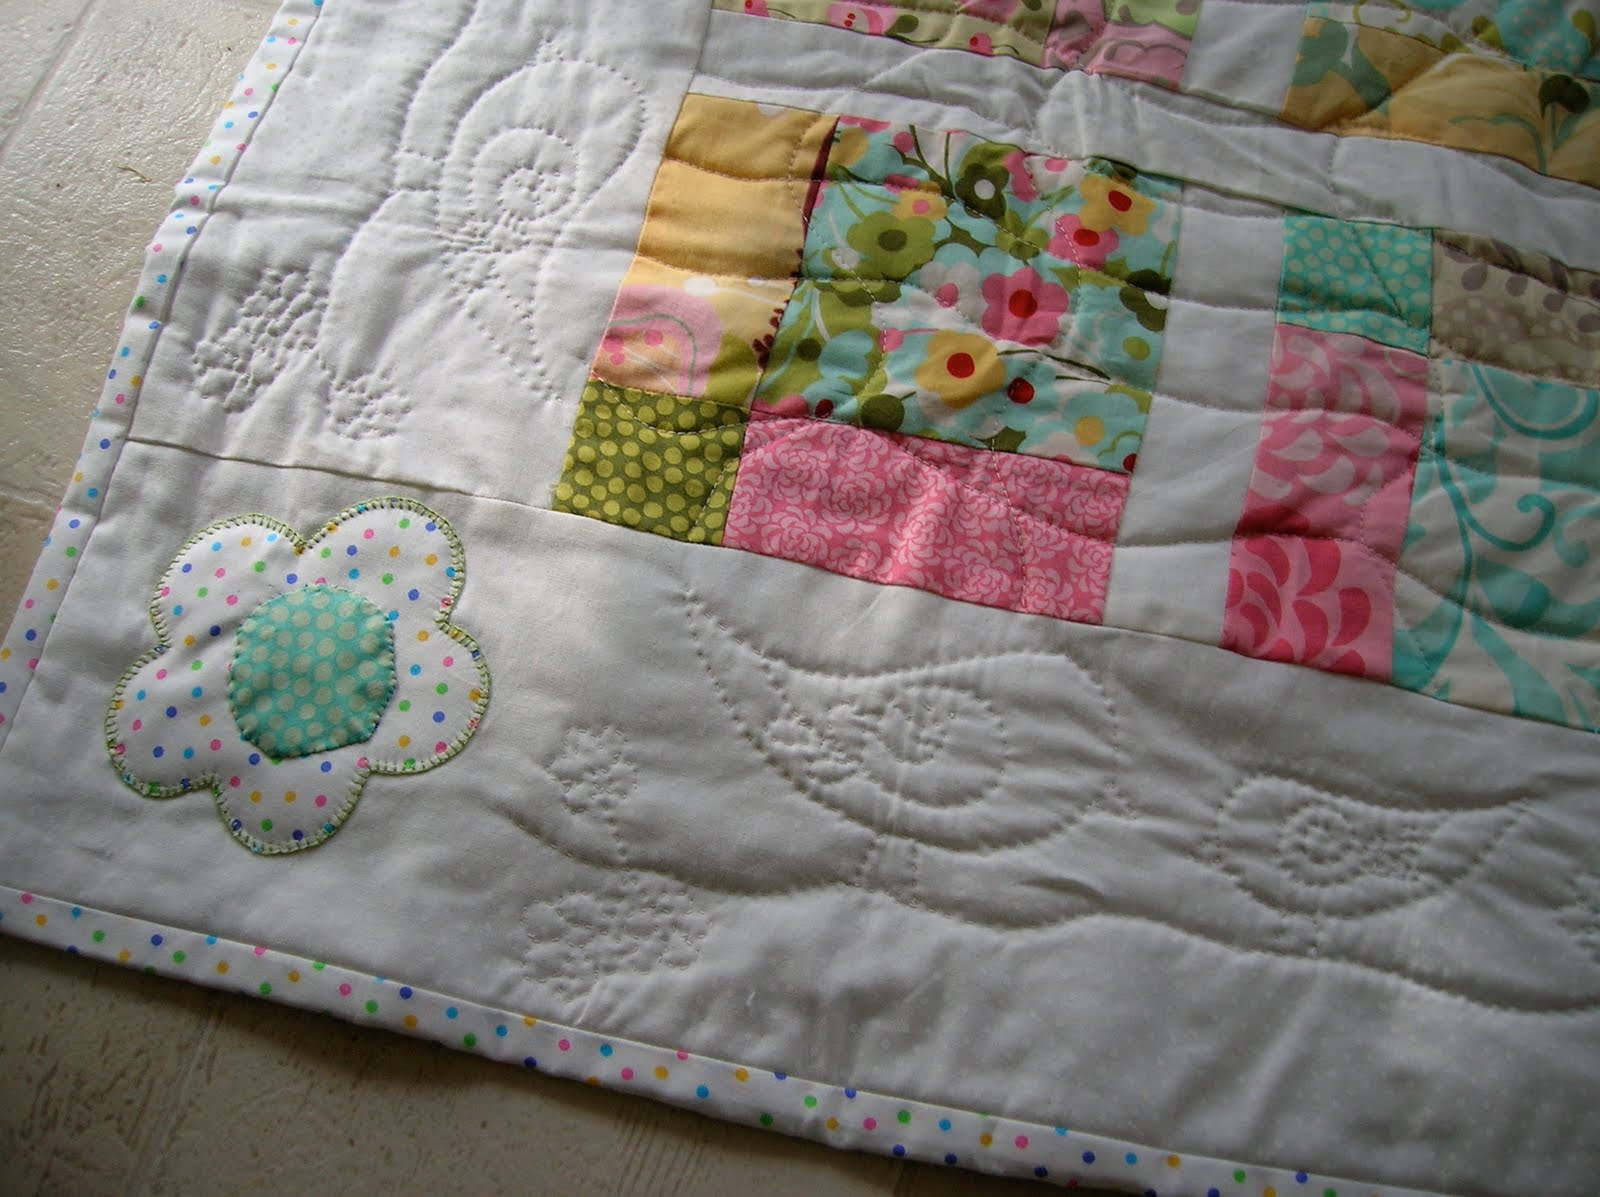 Hand Embroidery Patterns For Quilts Hand Embroidery Quilting Free Embroidery Patterns Solid Bedspreads